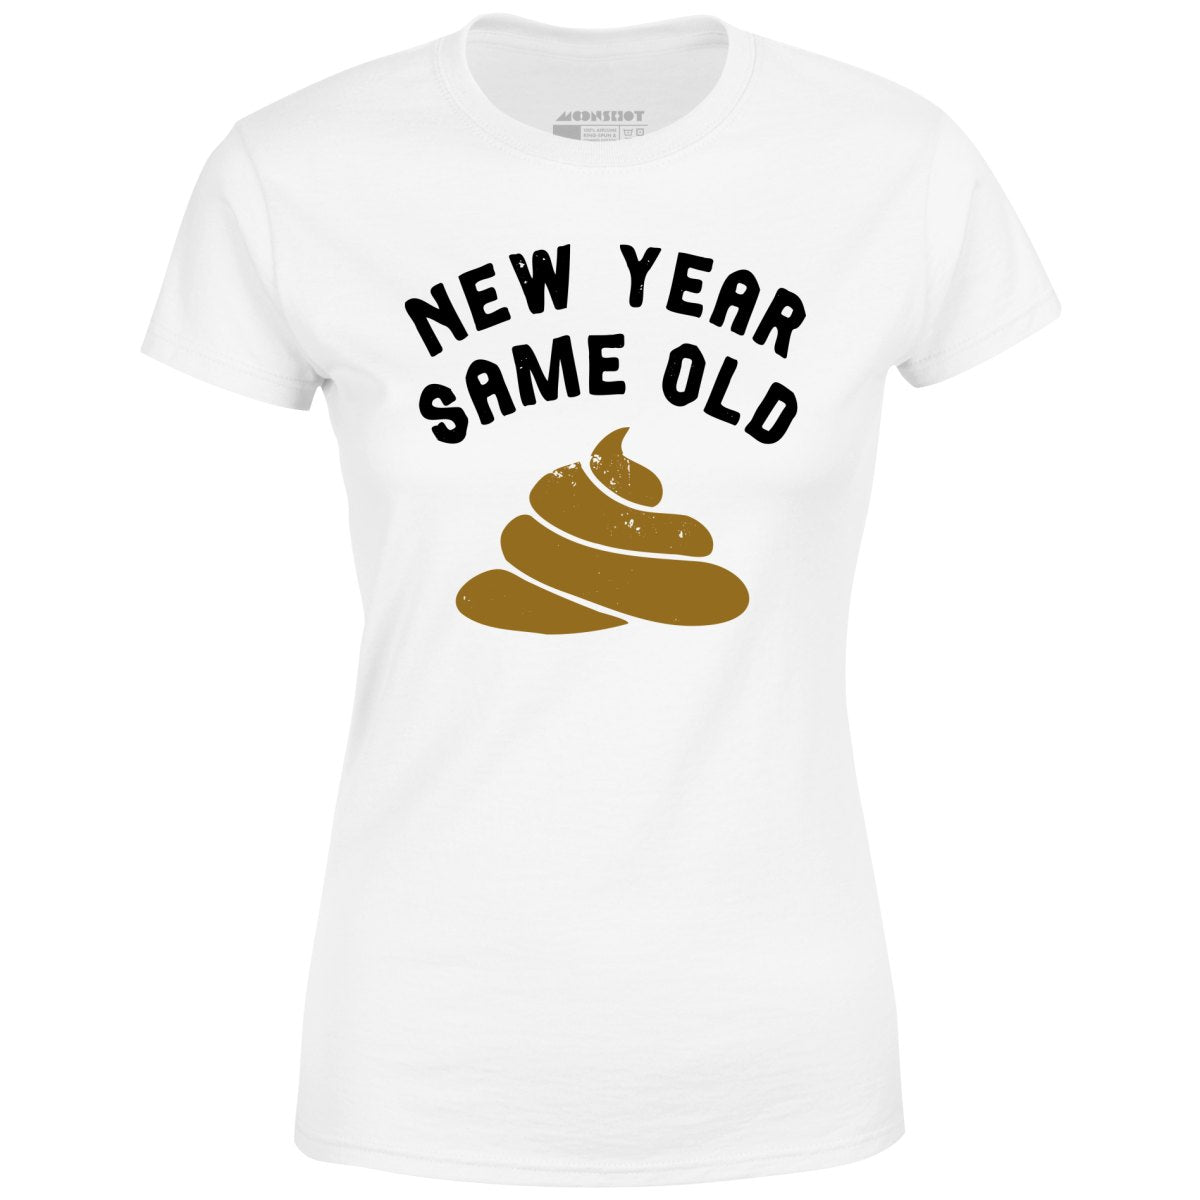 New Year Same Old - Women's T-Shirt